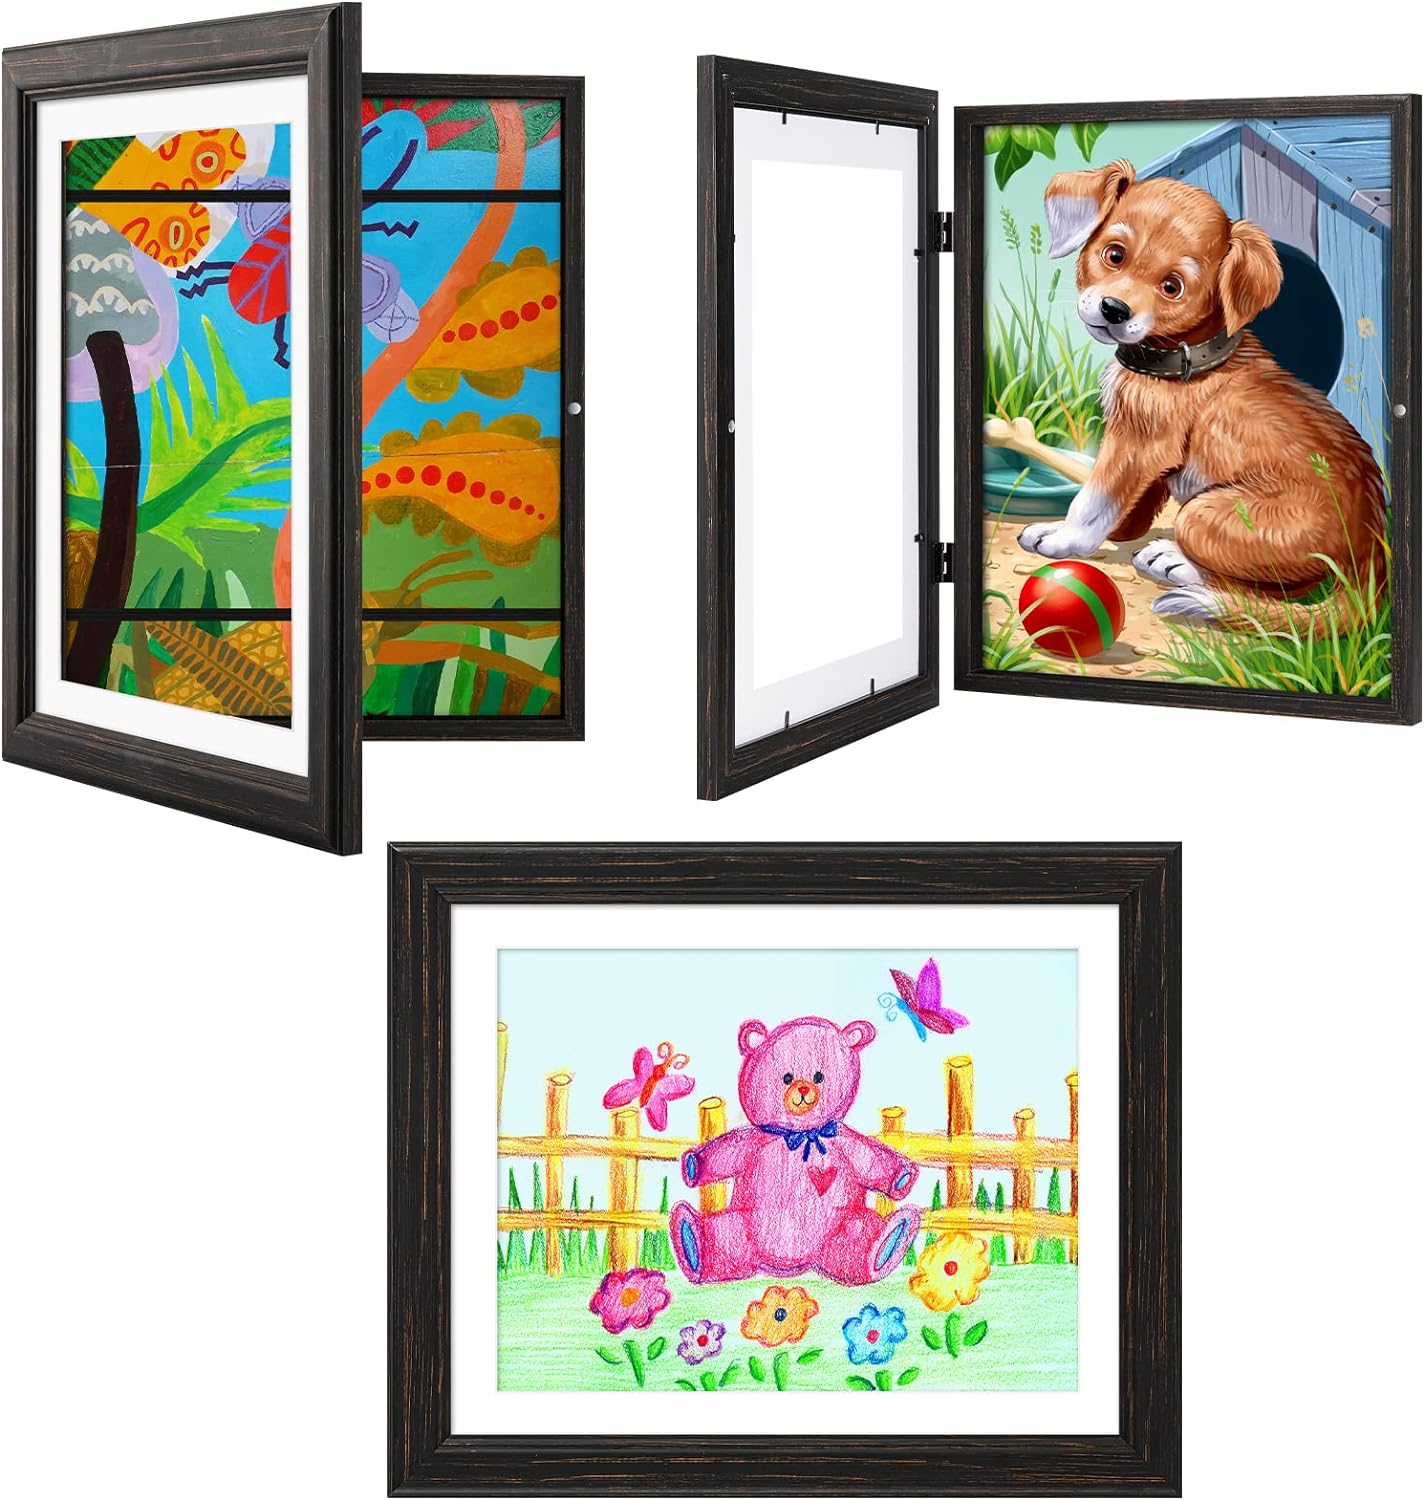 Kids Art Frames - Retro Black, 8.5x11 With Mat and 10x12.5 Without, Holds 50 Crafts, Drawings, Artwork - Children' Storage Frames, Set of 3